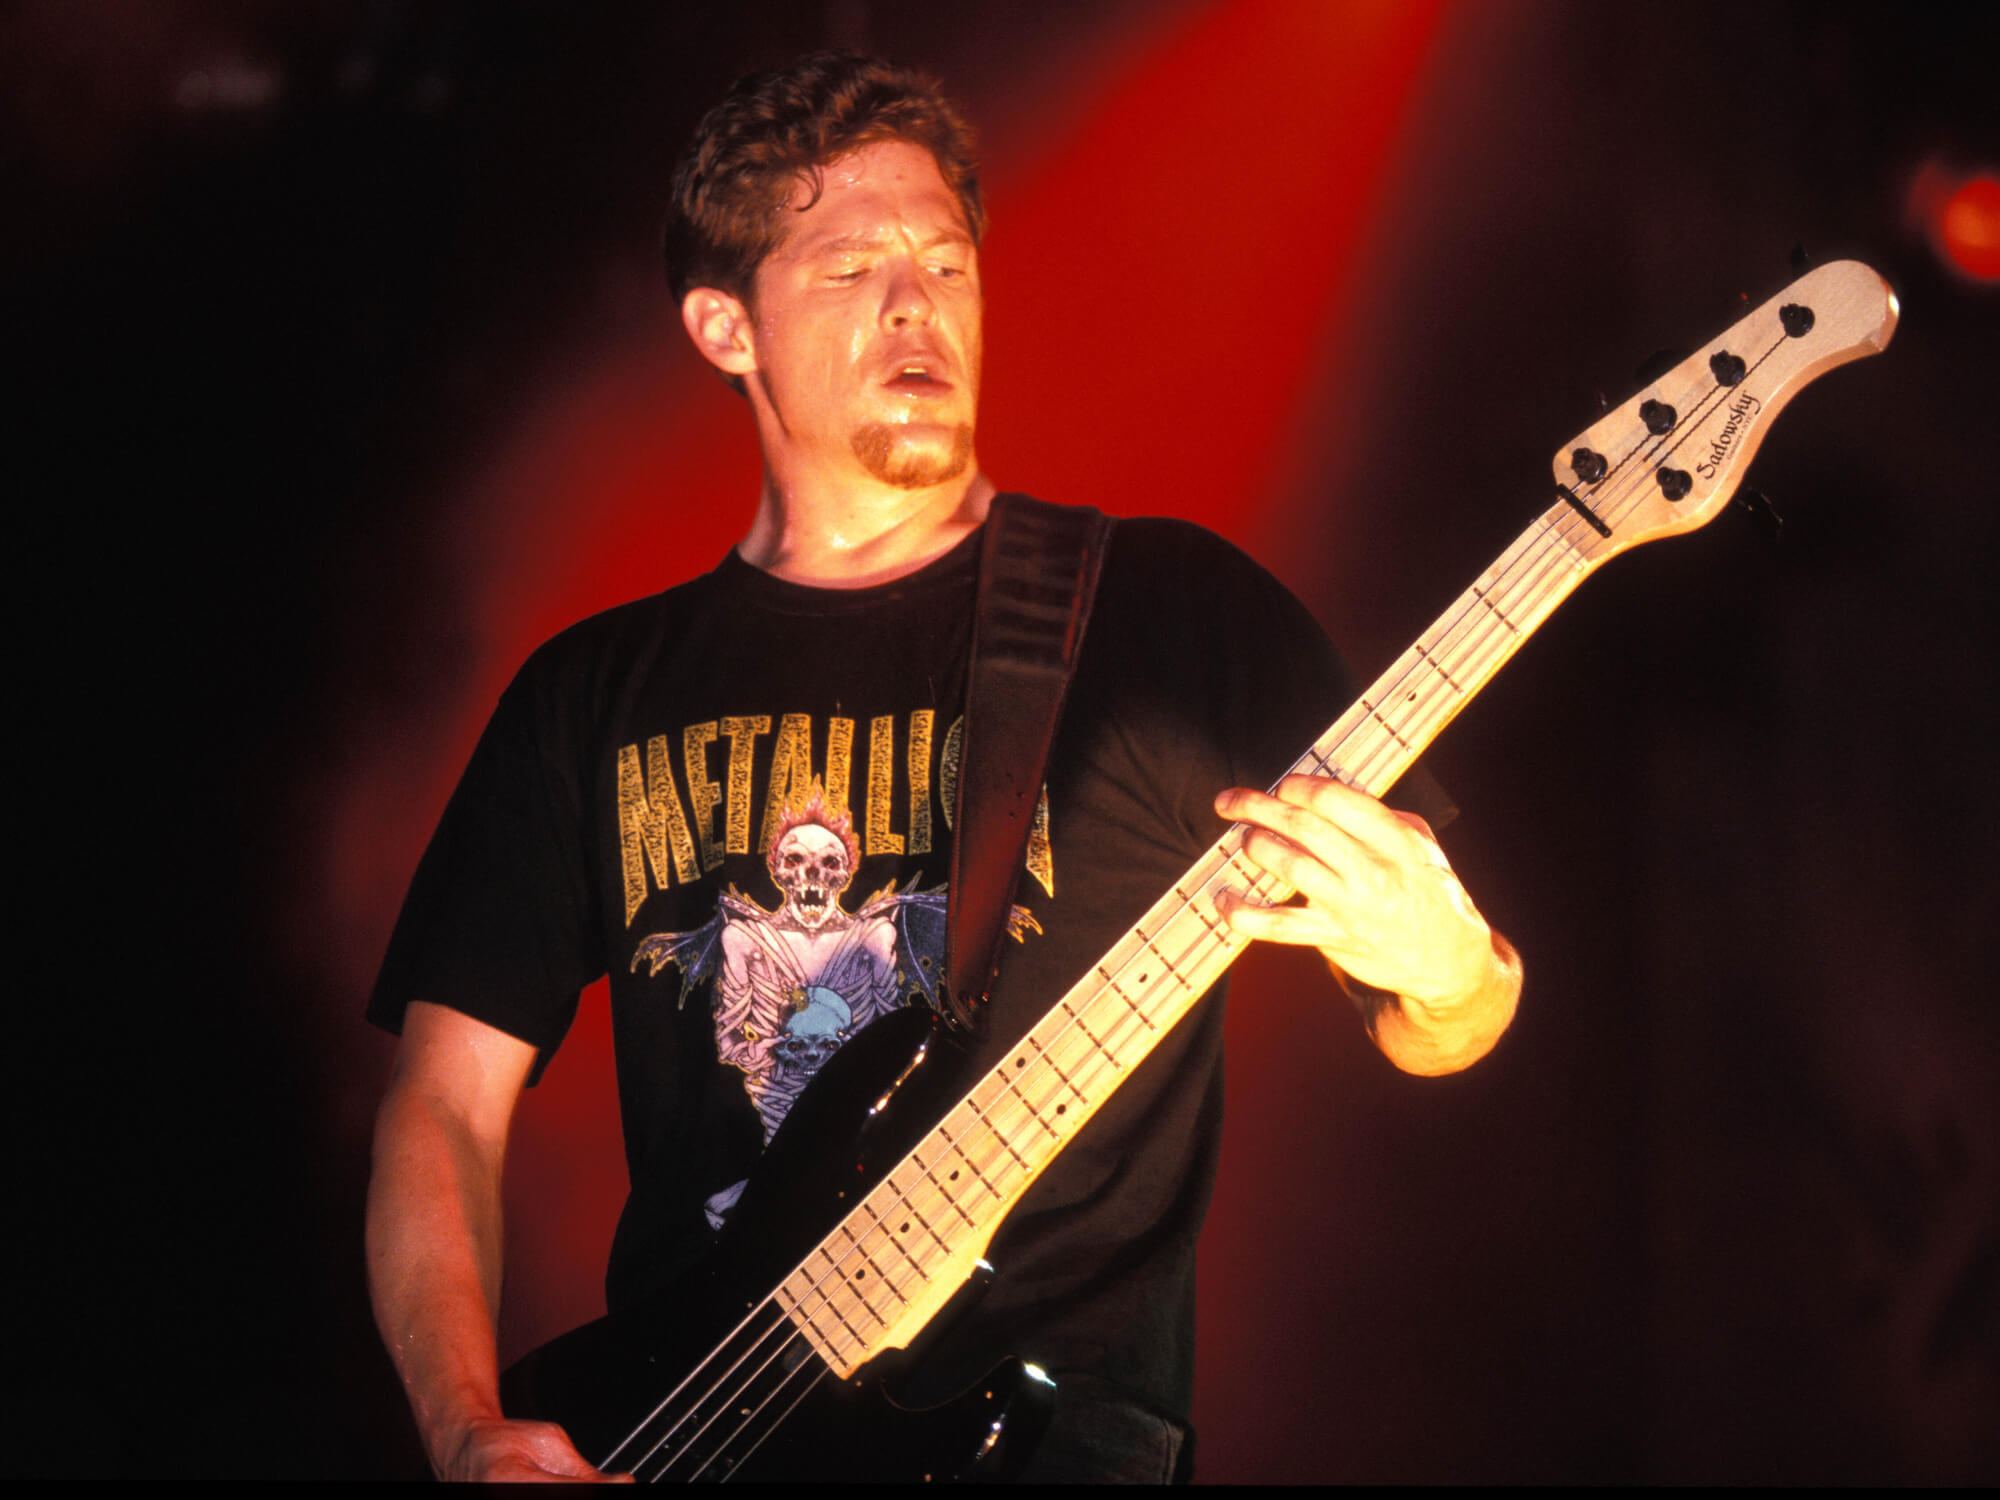 Jason Newsted performing as Metallica